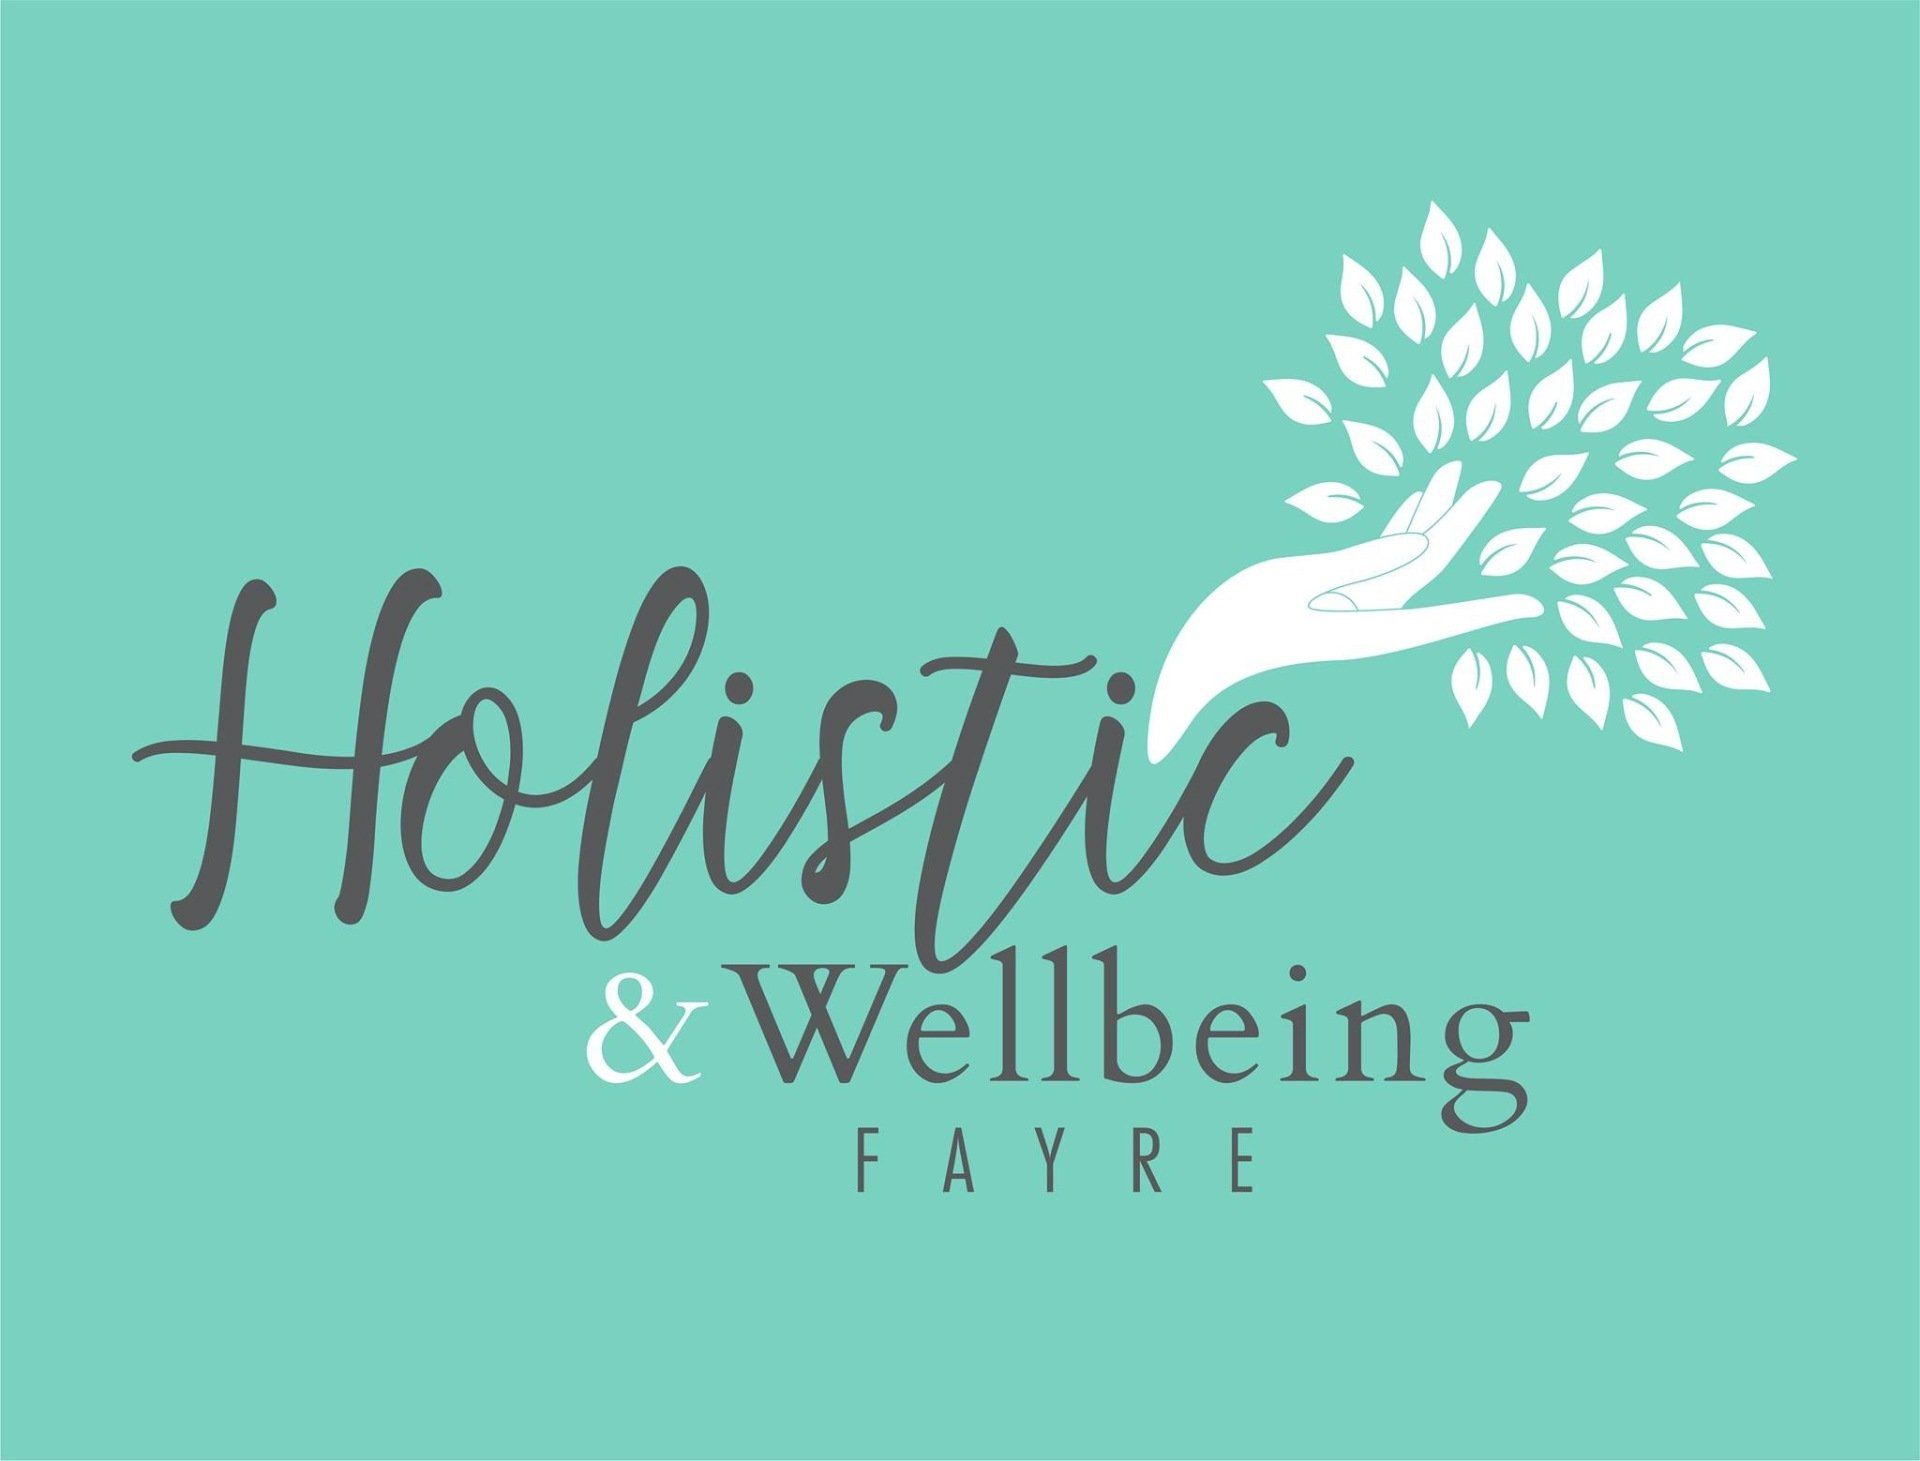 Westlands Holistic and Wellbeing Fayre